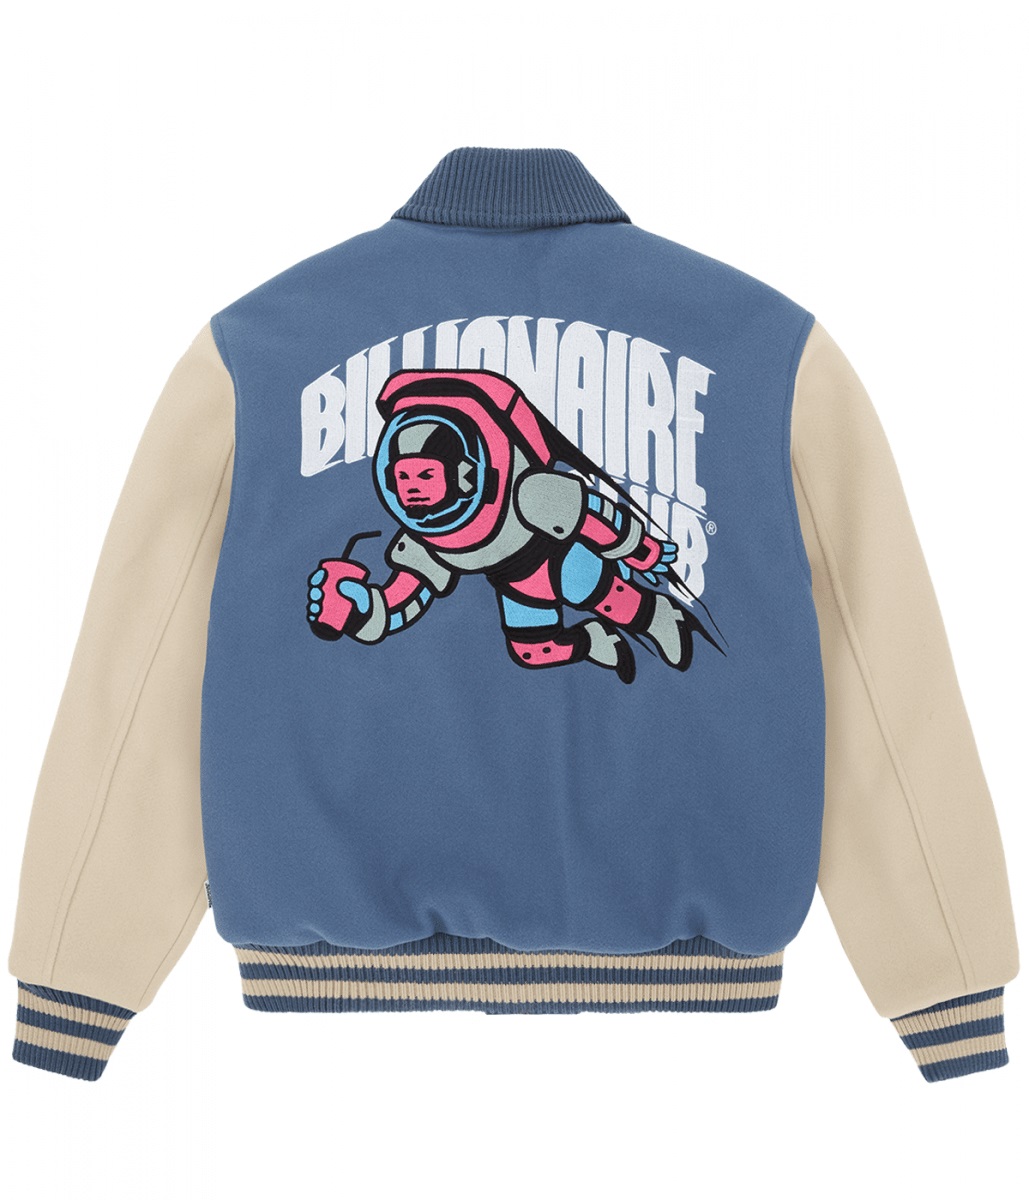 Cafeteria BBC Blue and Off-White Letterman Jacket